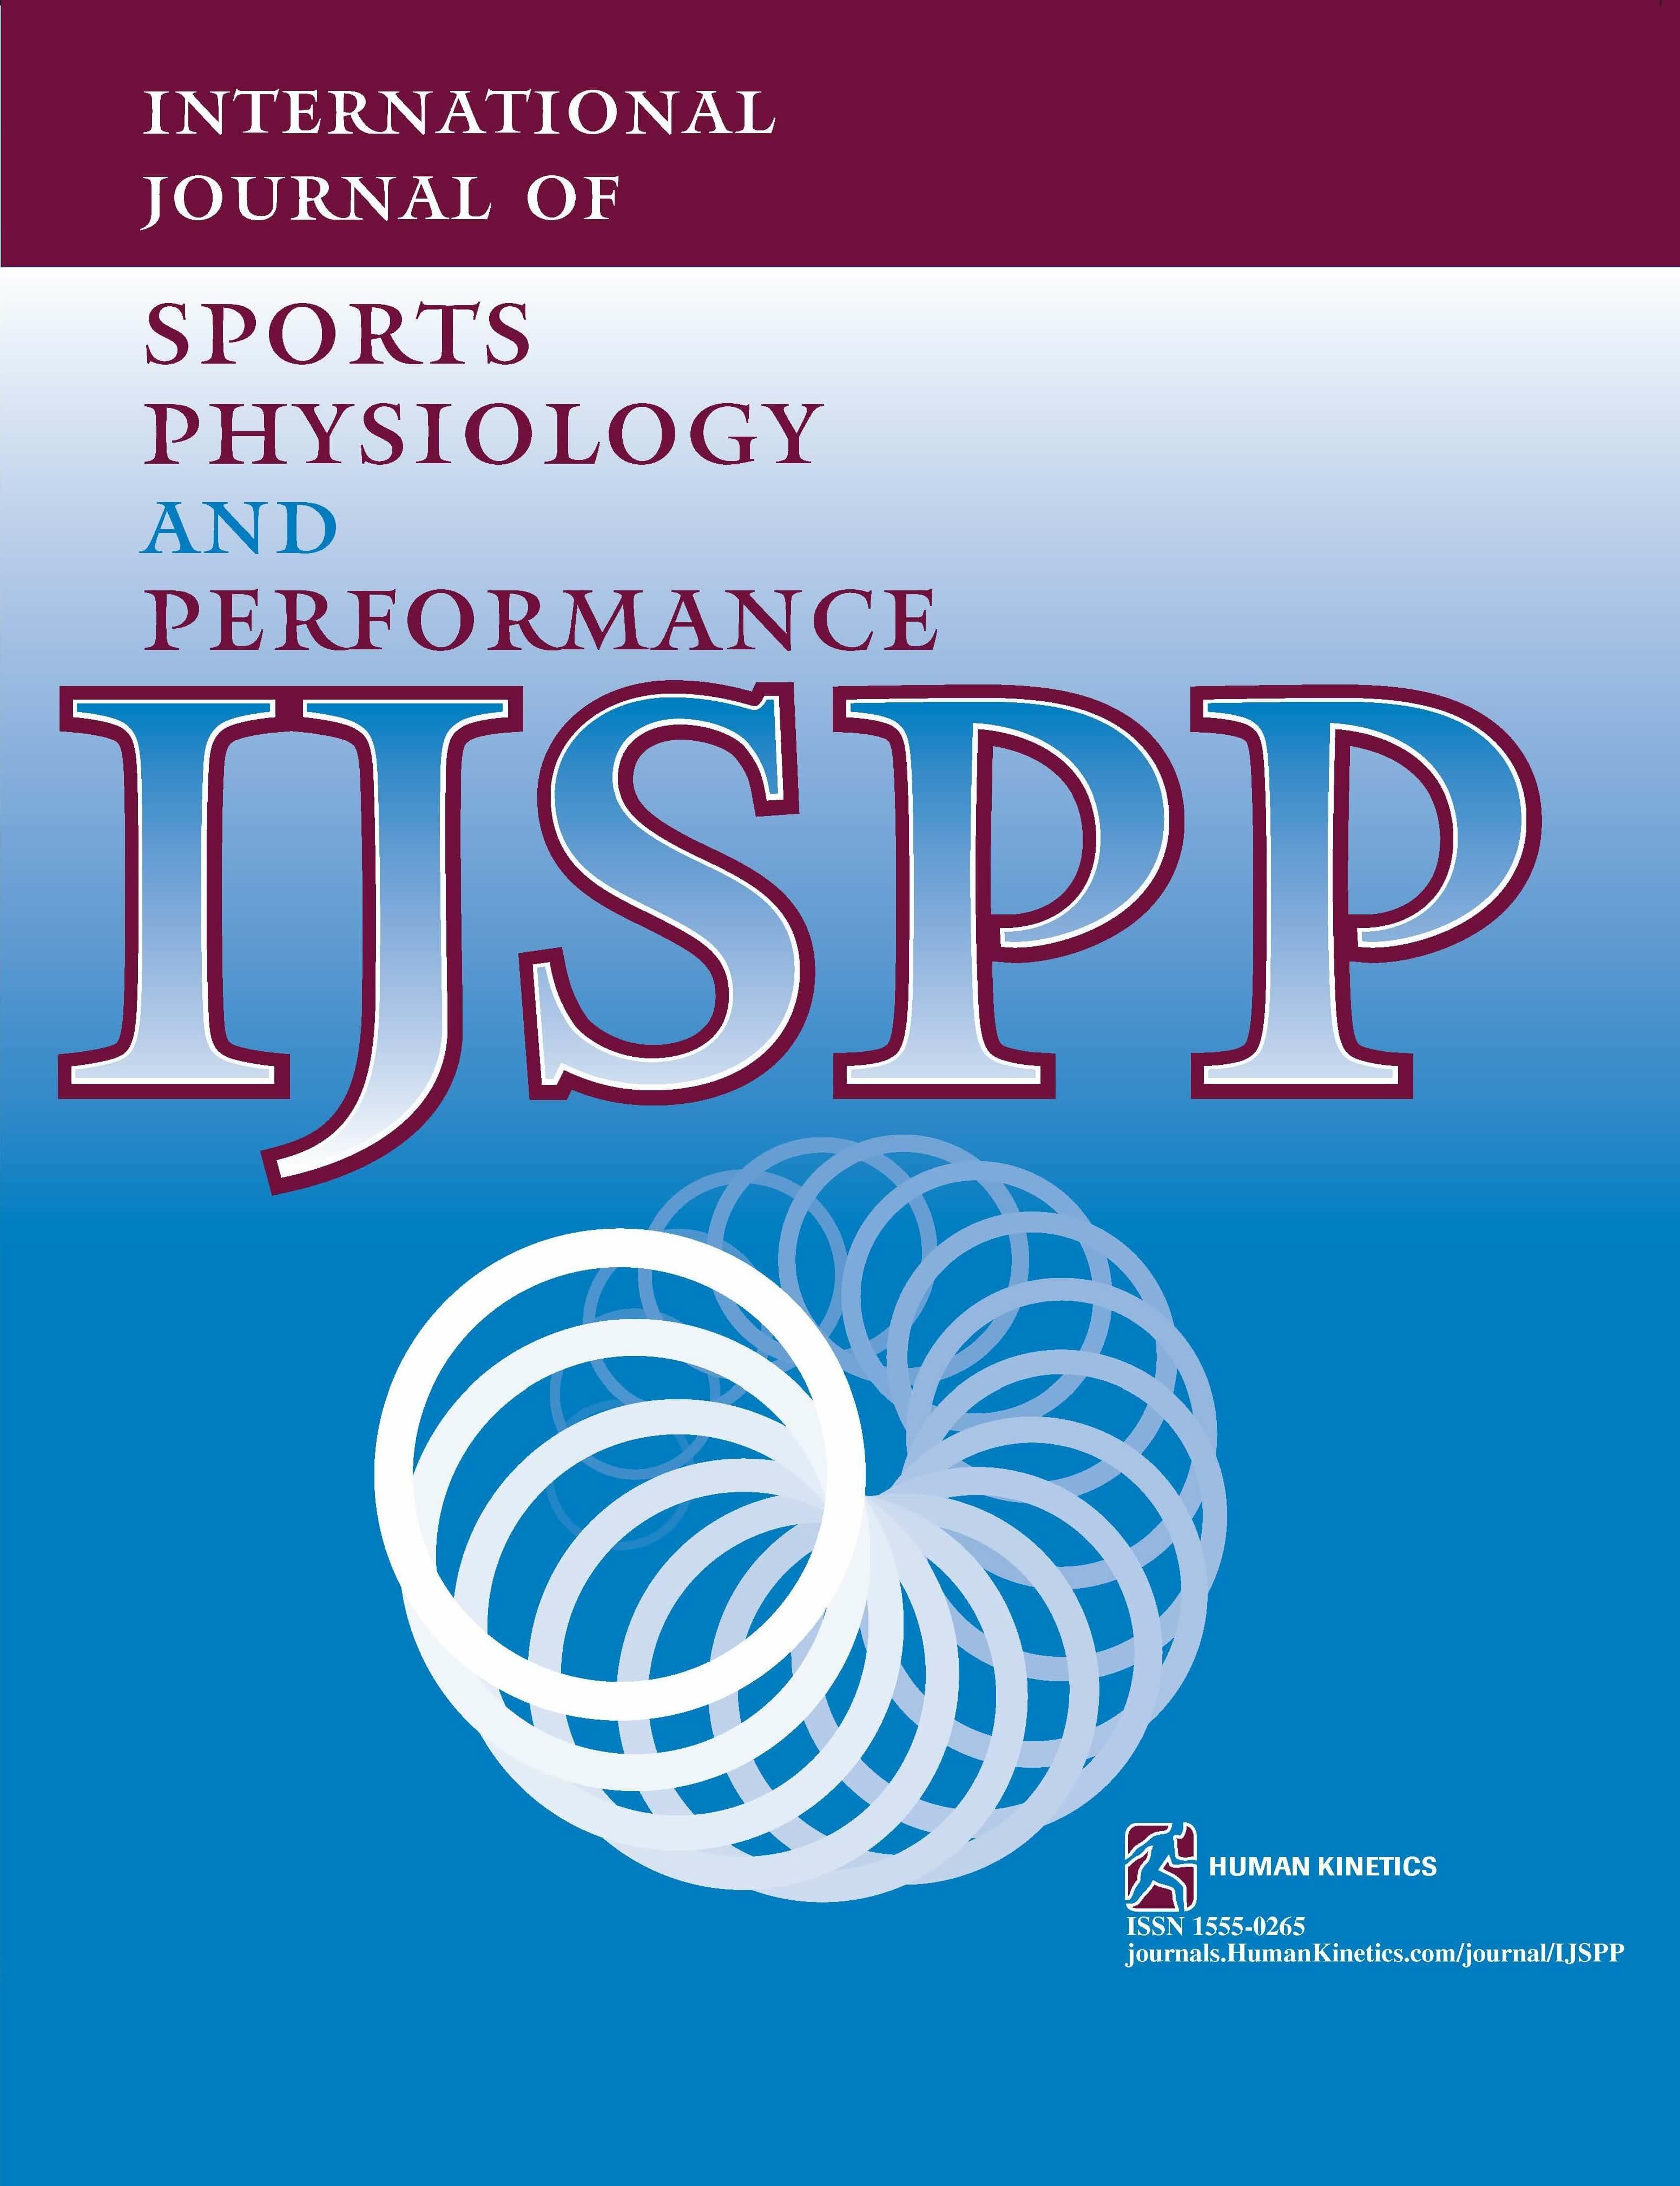 Sleep Quality in Team USA Olympic and Paralympic Athletes